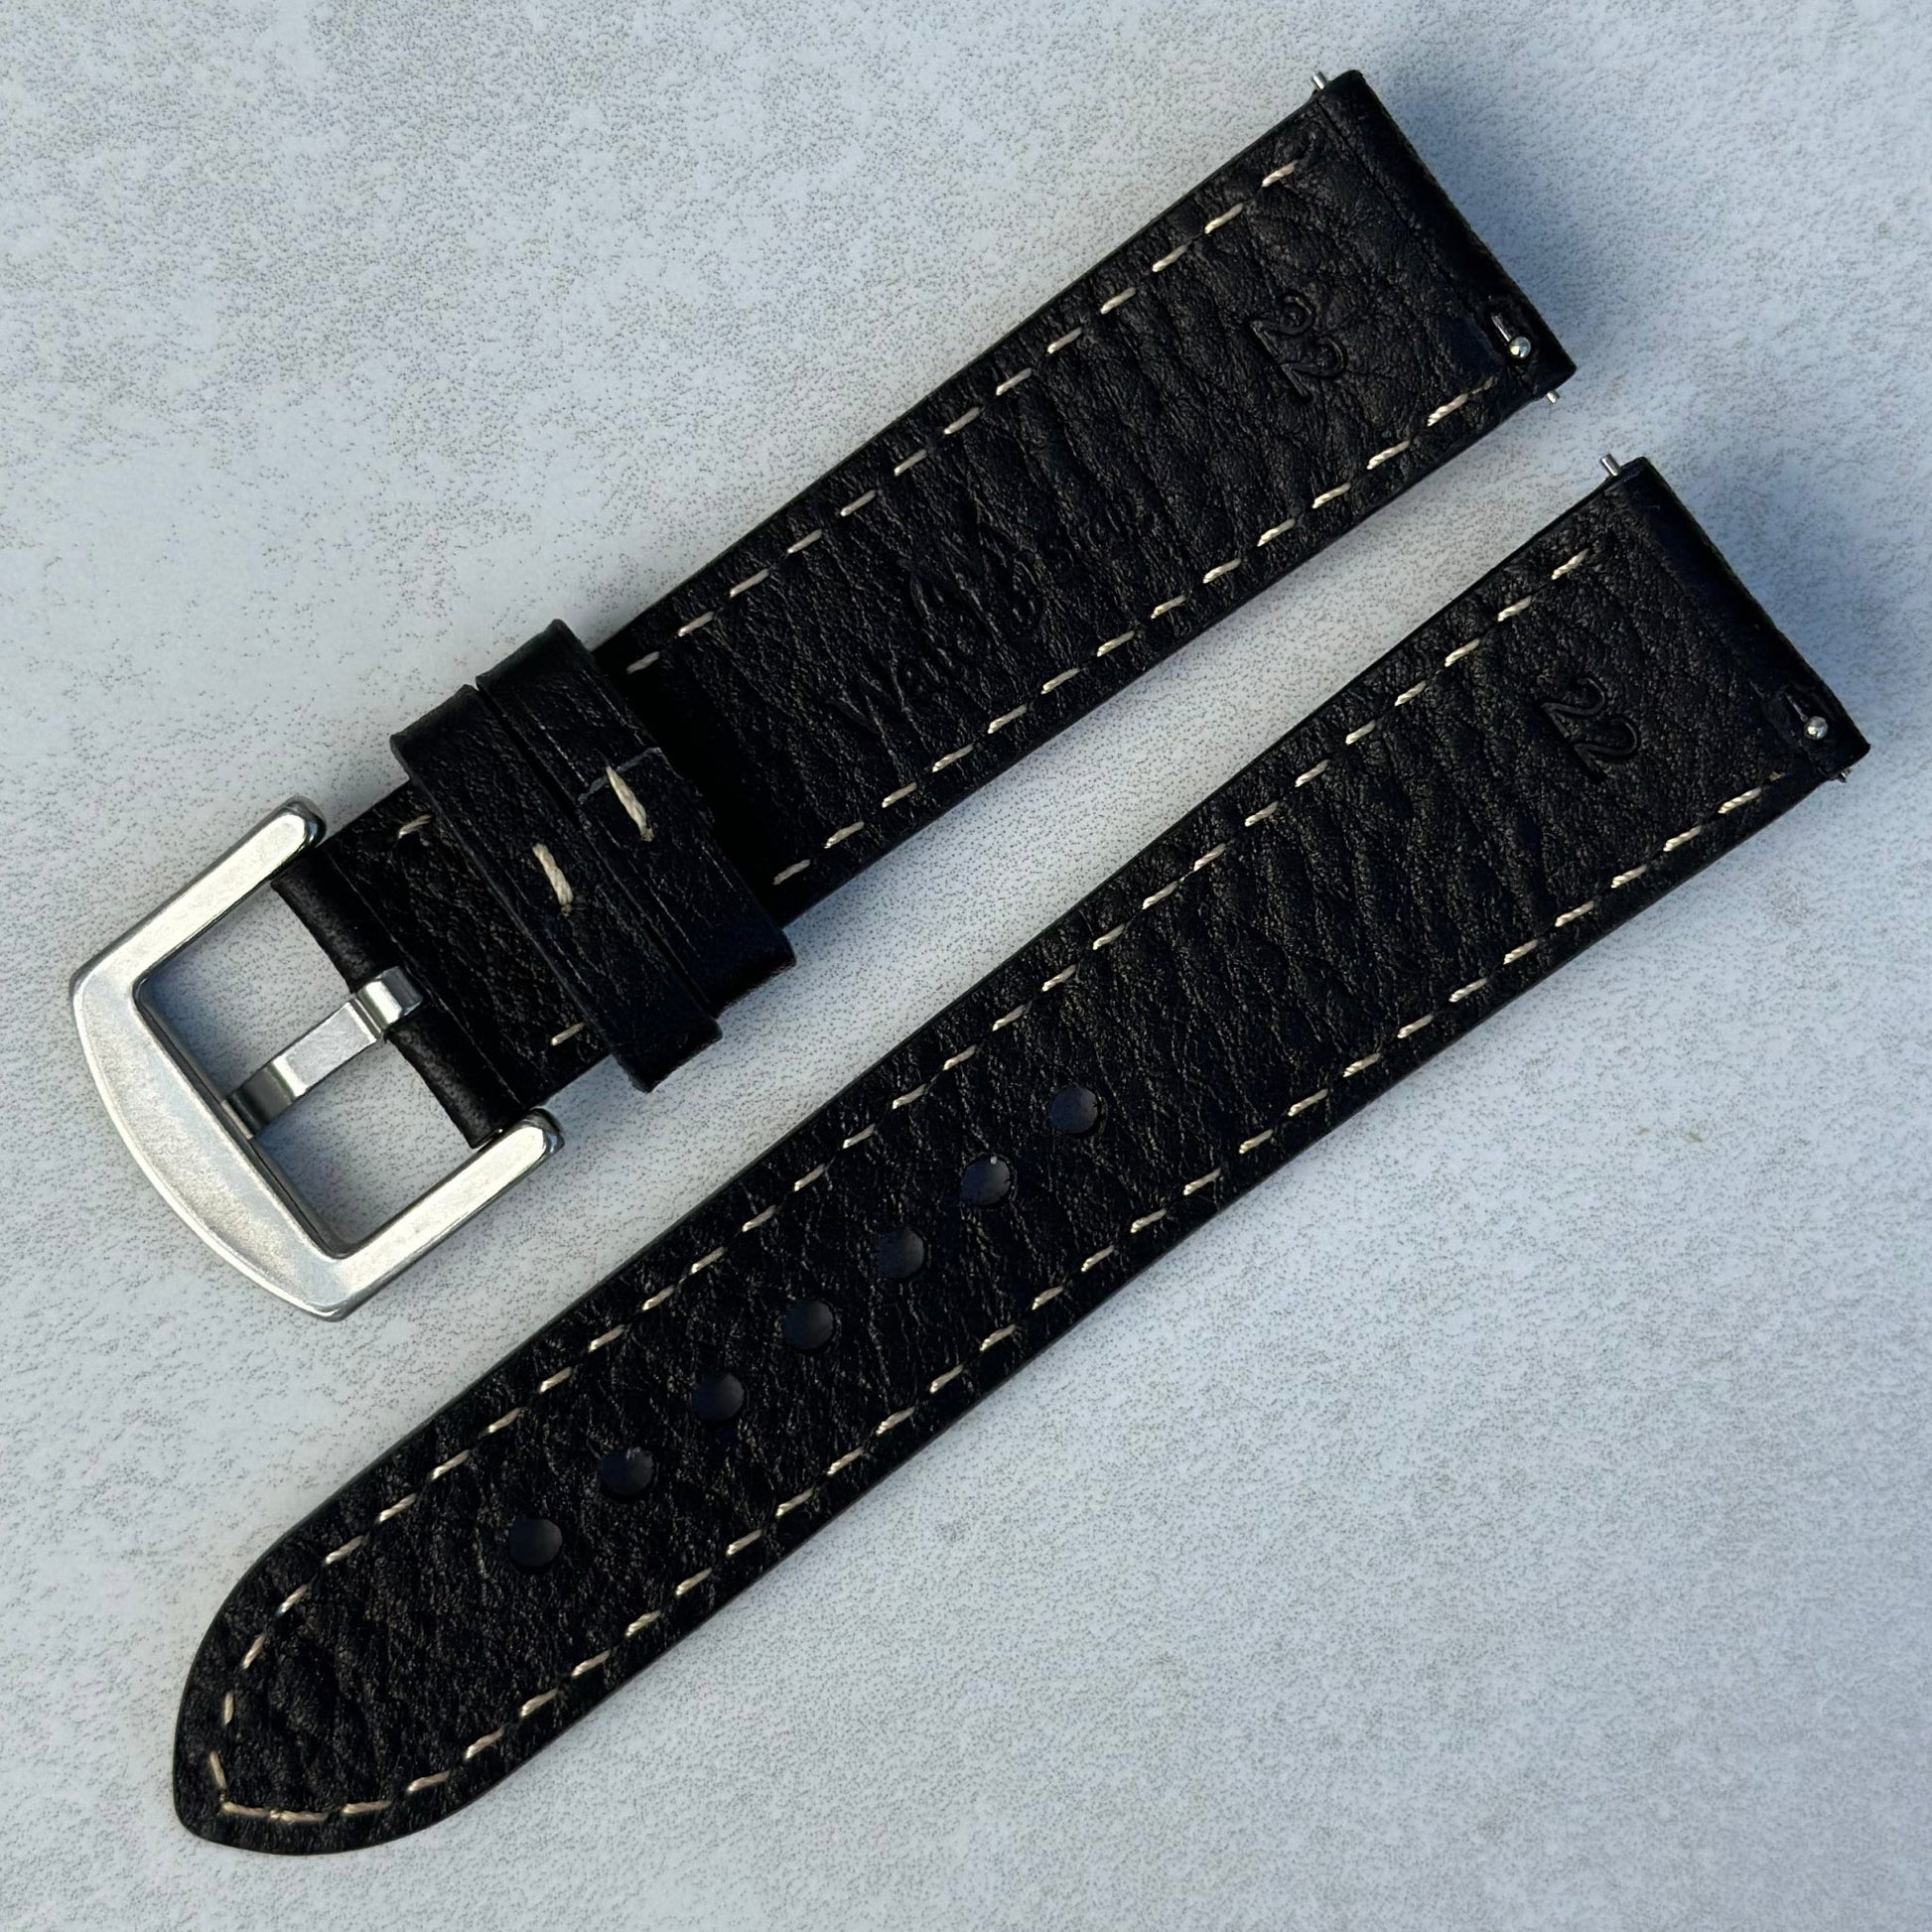 Rear of the Rome jet black Italian leather watch strap. Quick release pins. Watch And Strap